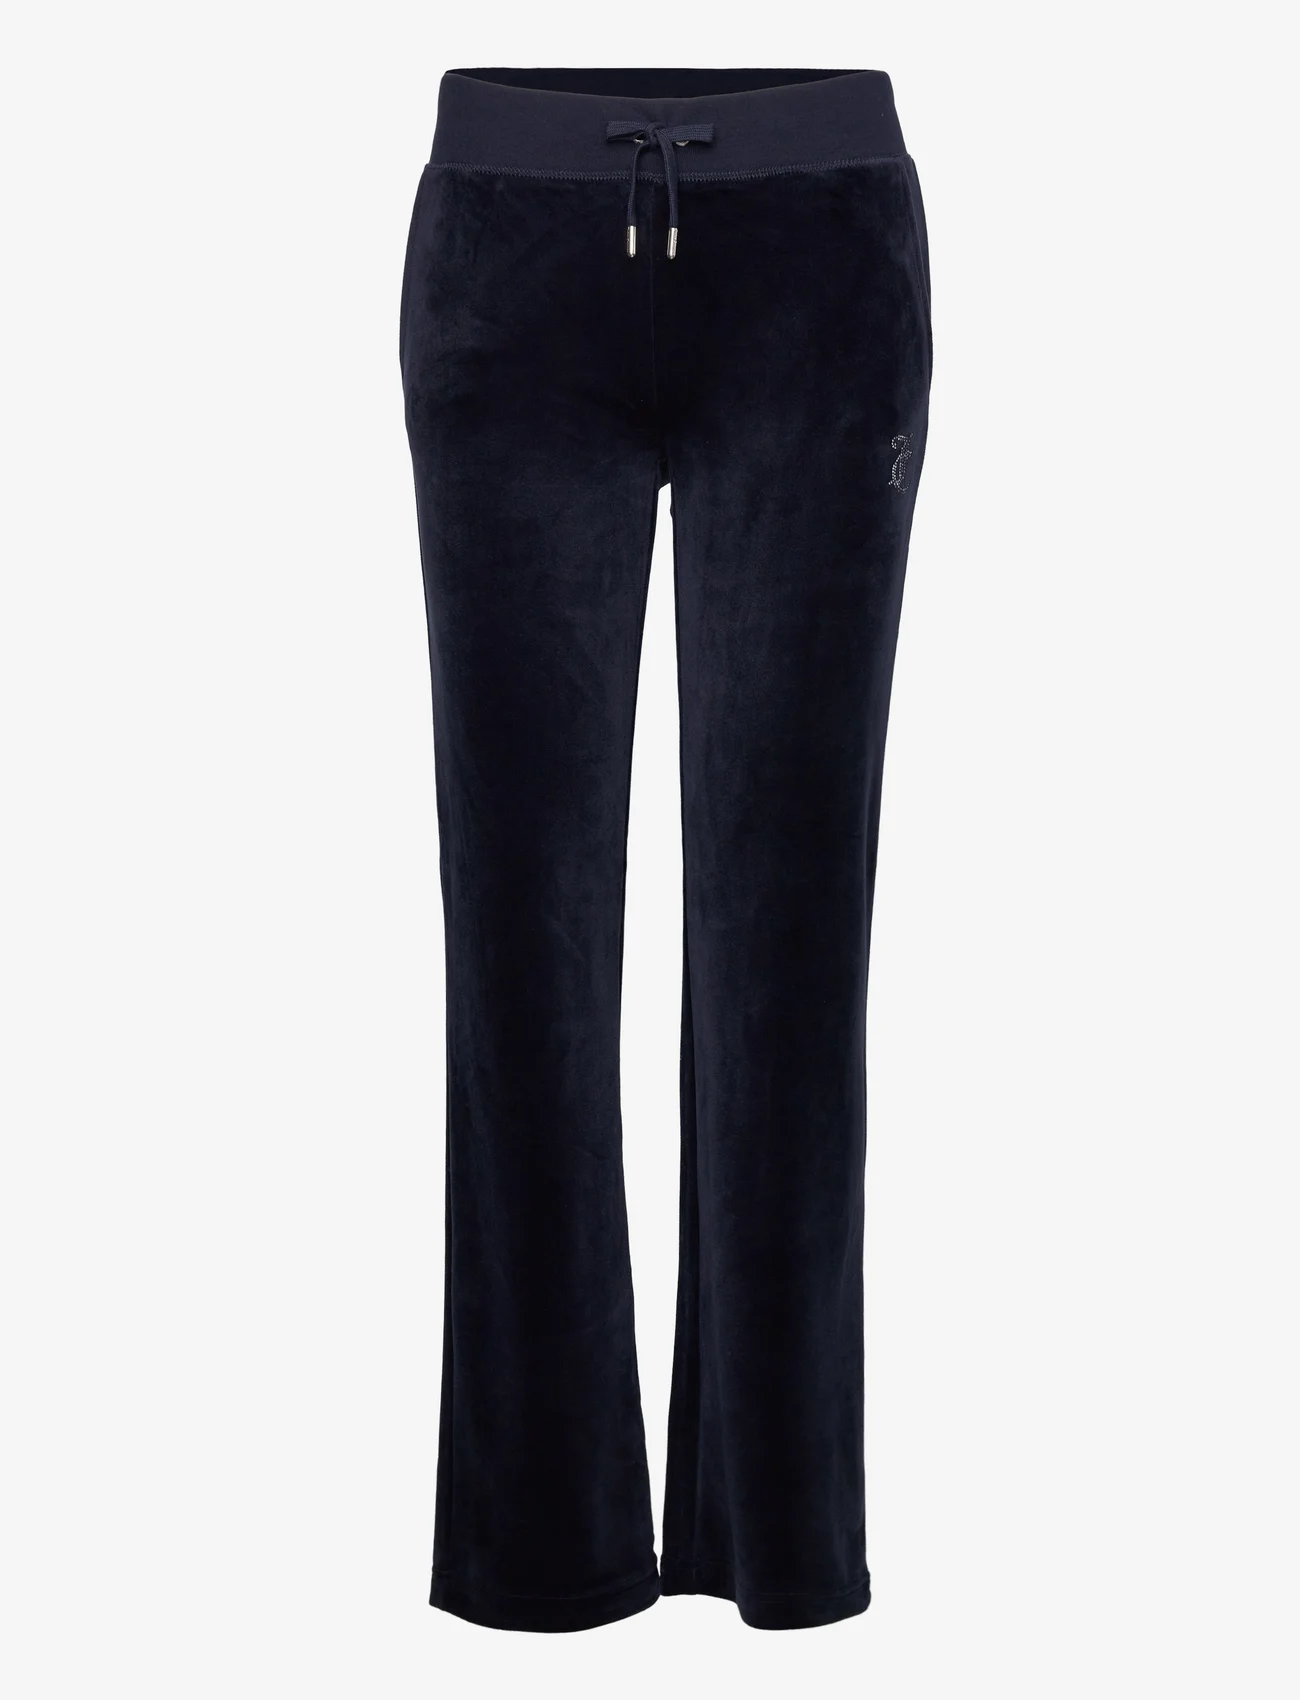 Juicy Couture - ARCHED DIAMANTE DEL RAY PANT - nederdelar - night sky - 0